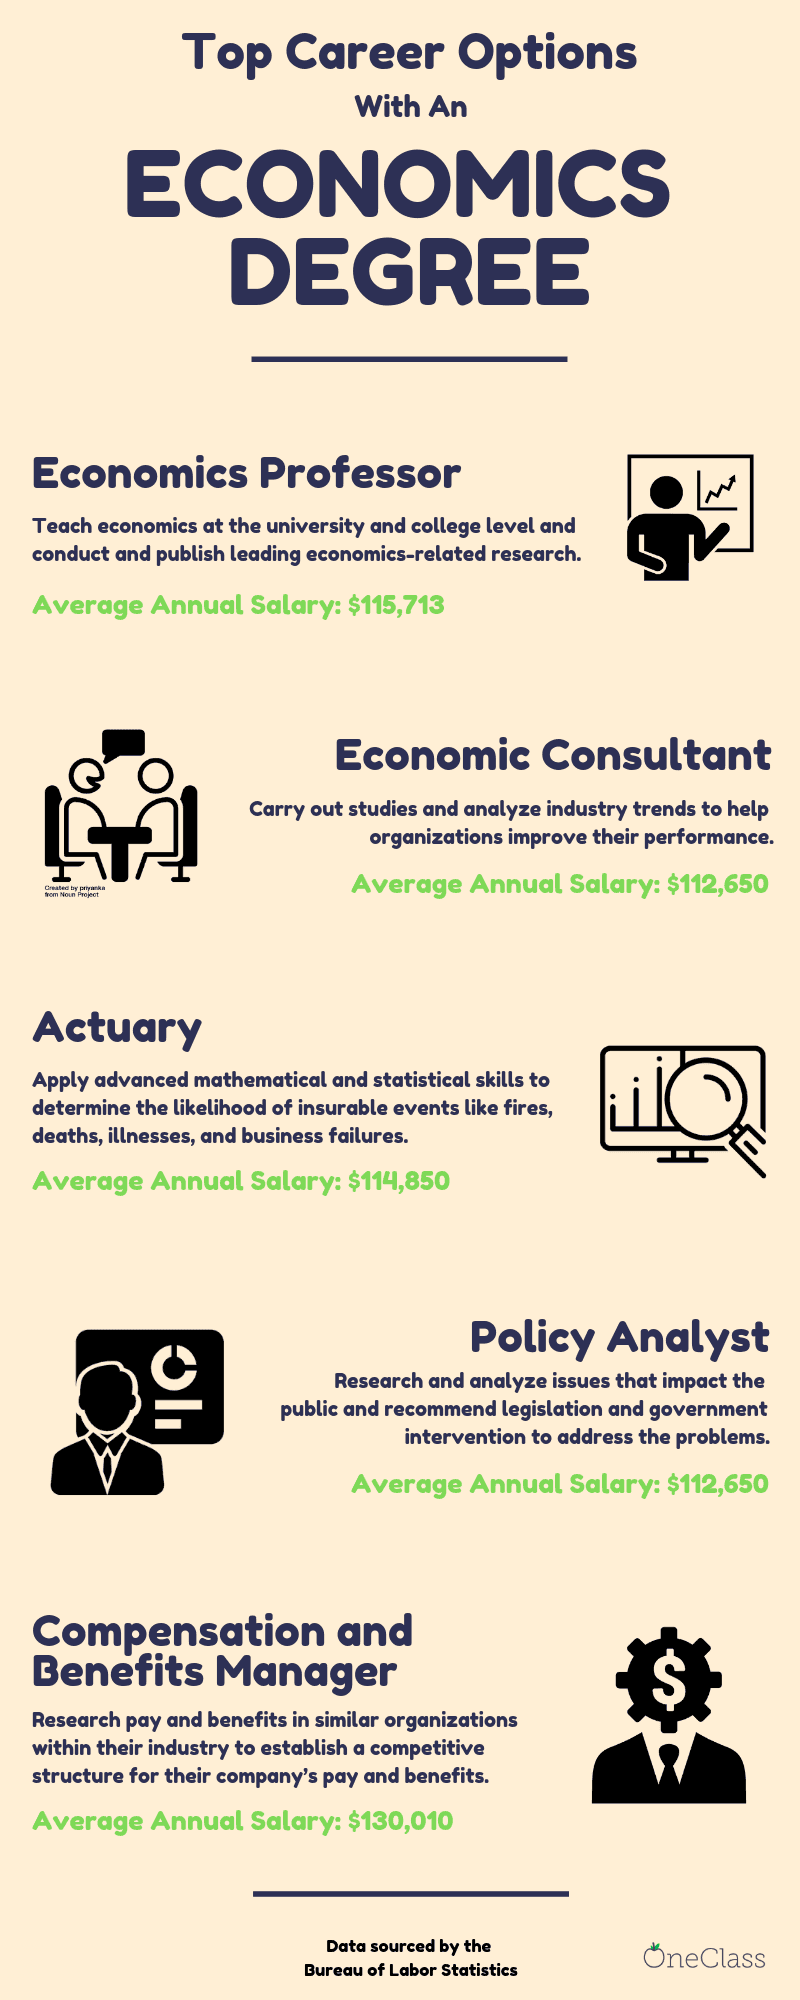 infographic showing the top 5 career options with an economics degree. The options are economics professor, economic consultant, actuary, policy analyst, and compensation and benefits manager.